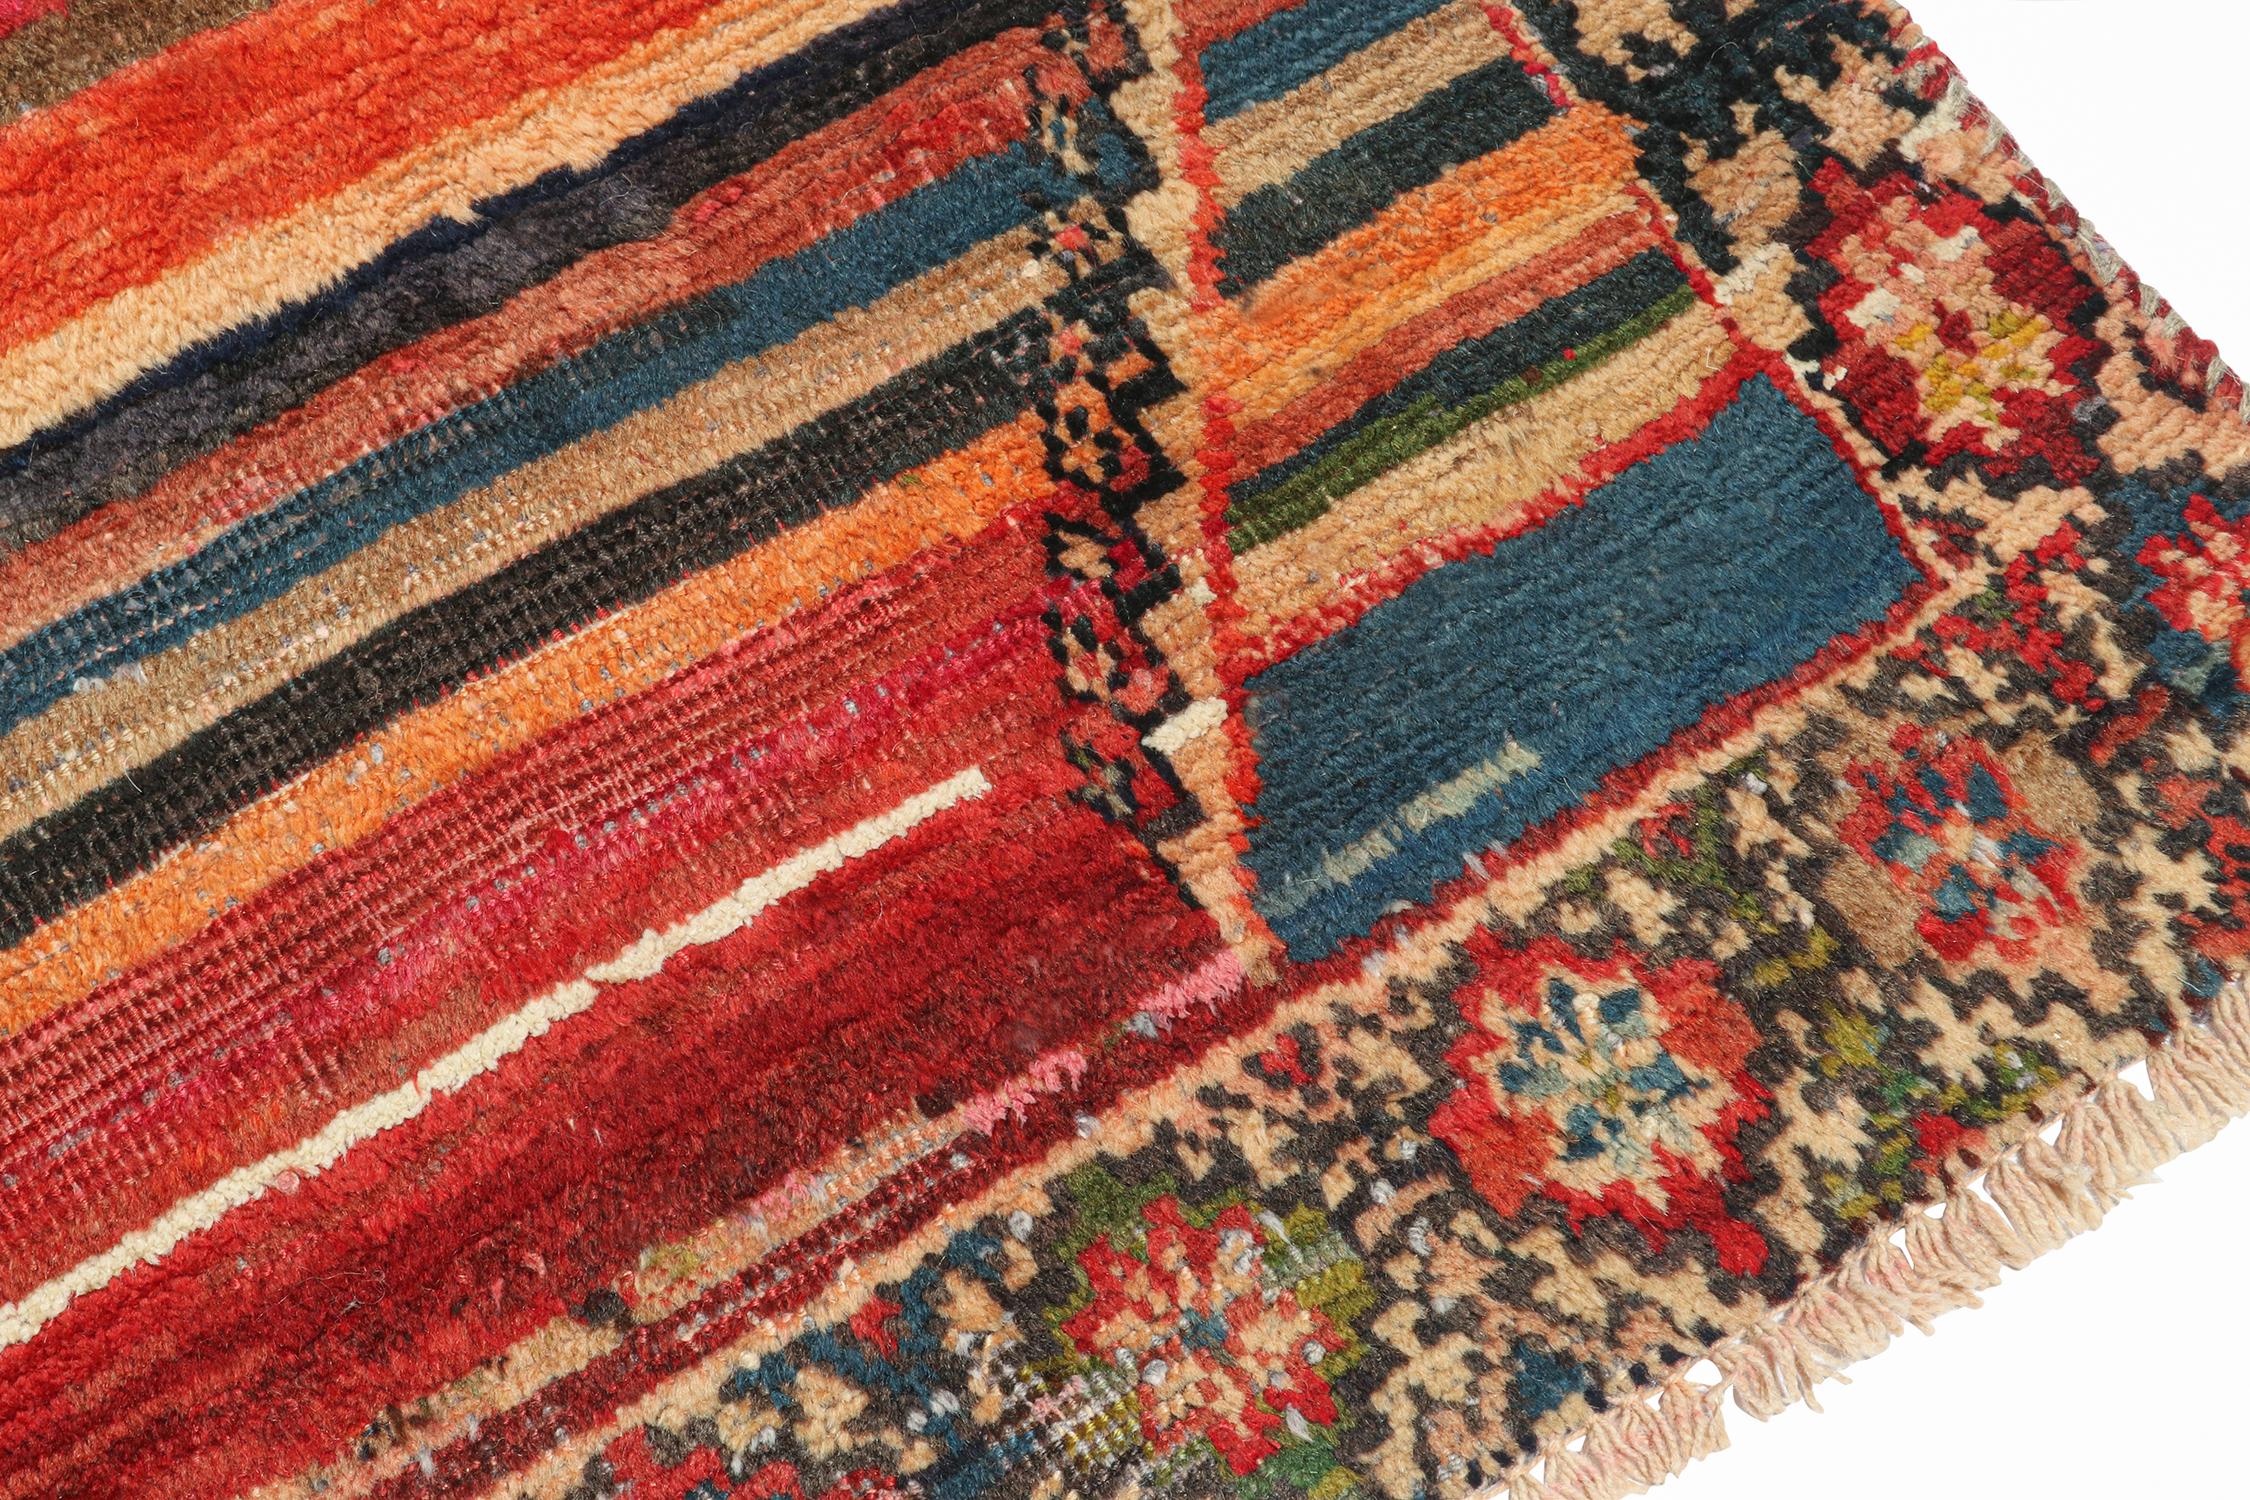 Vintage Gabbeh Tribal Rug in Polychromatic Stripes Patterns by Rug & Kilim In Good Condition For Sale In Long Island City, NY